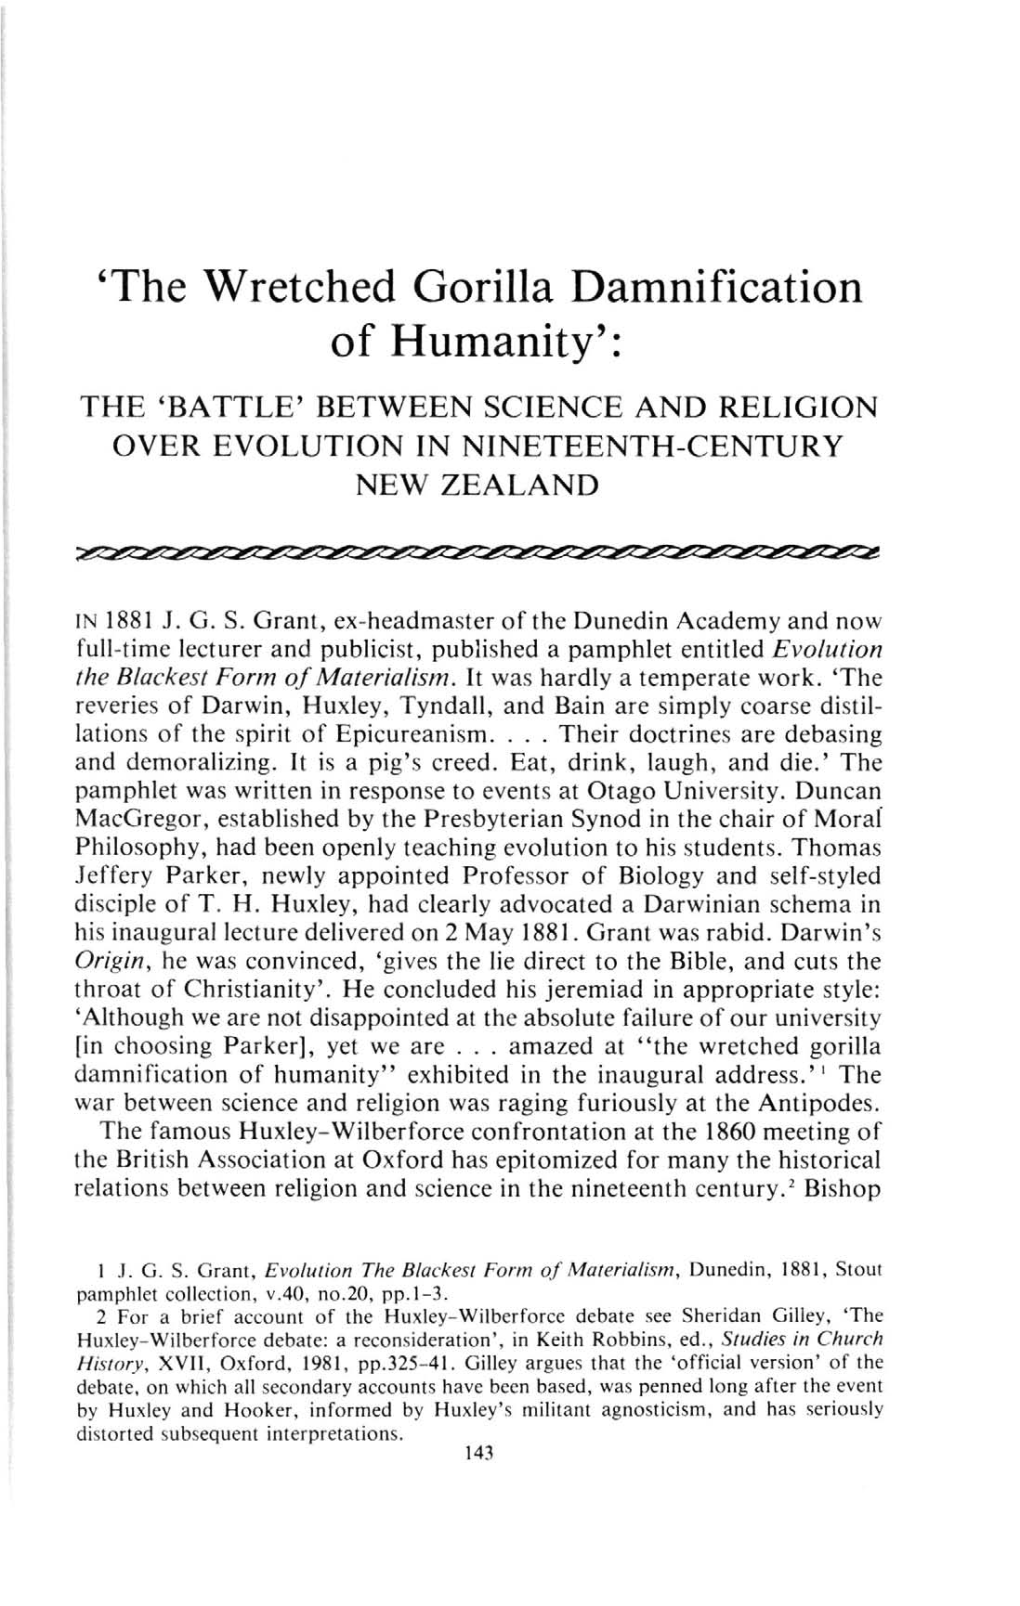 'The Wretched Gorilla Damnification of Humanity': the 'BATTLE' BETWEEN SCIENCE and RELIGION OVER EVOLUTION in NINETEENTH-CENTURY NEW ZEALAND